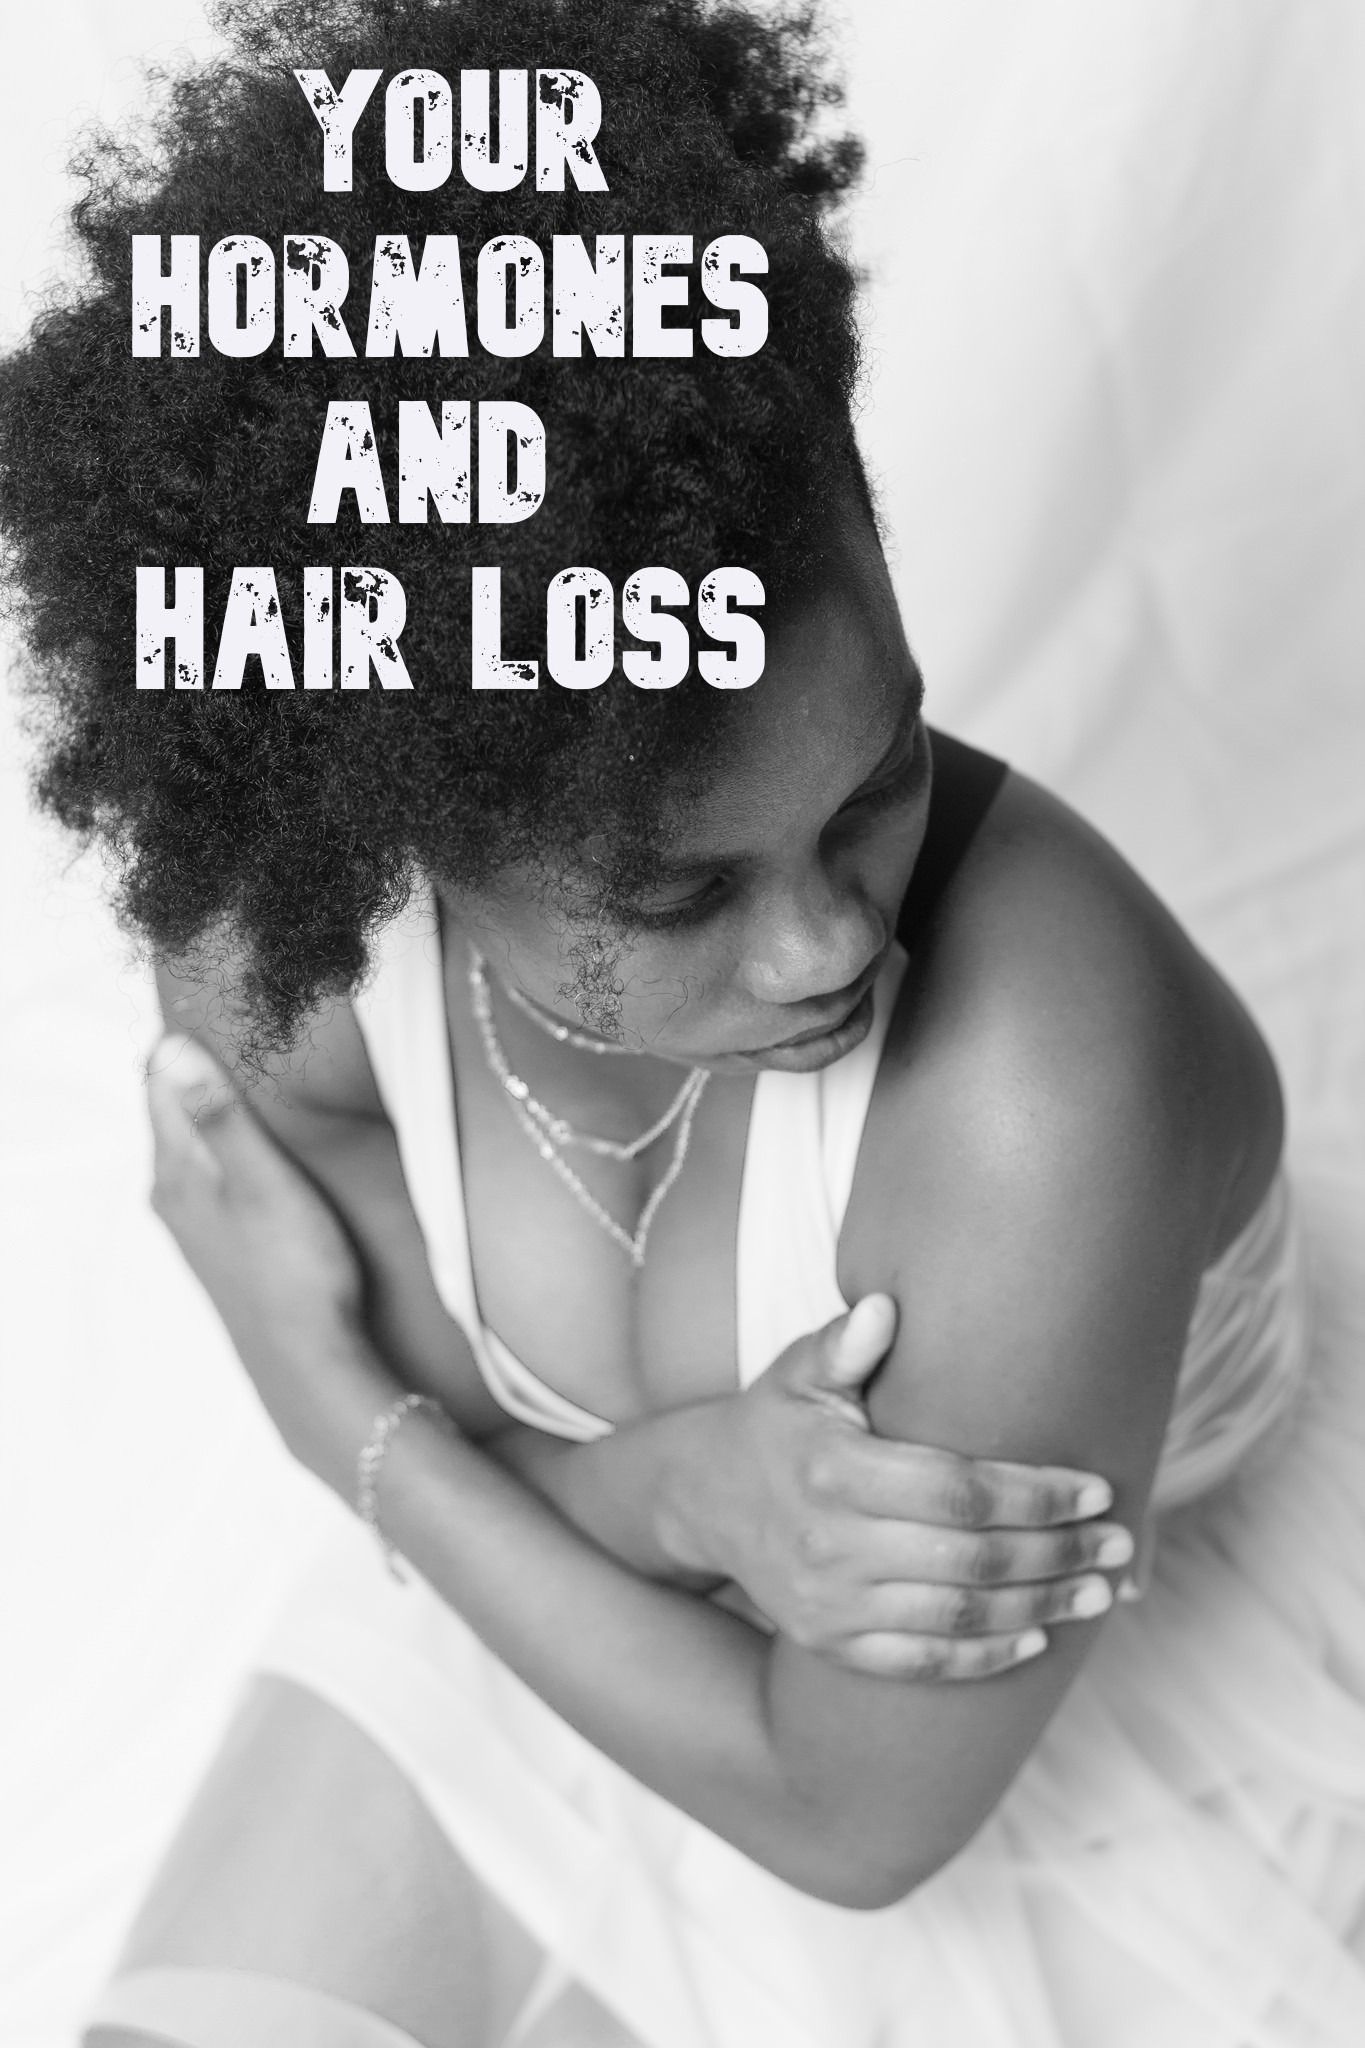 HORMONES AND HAIR LOSS